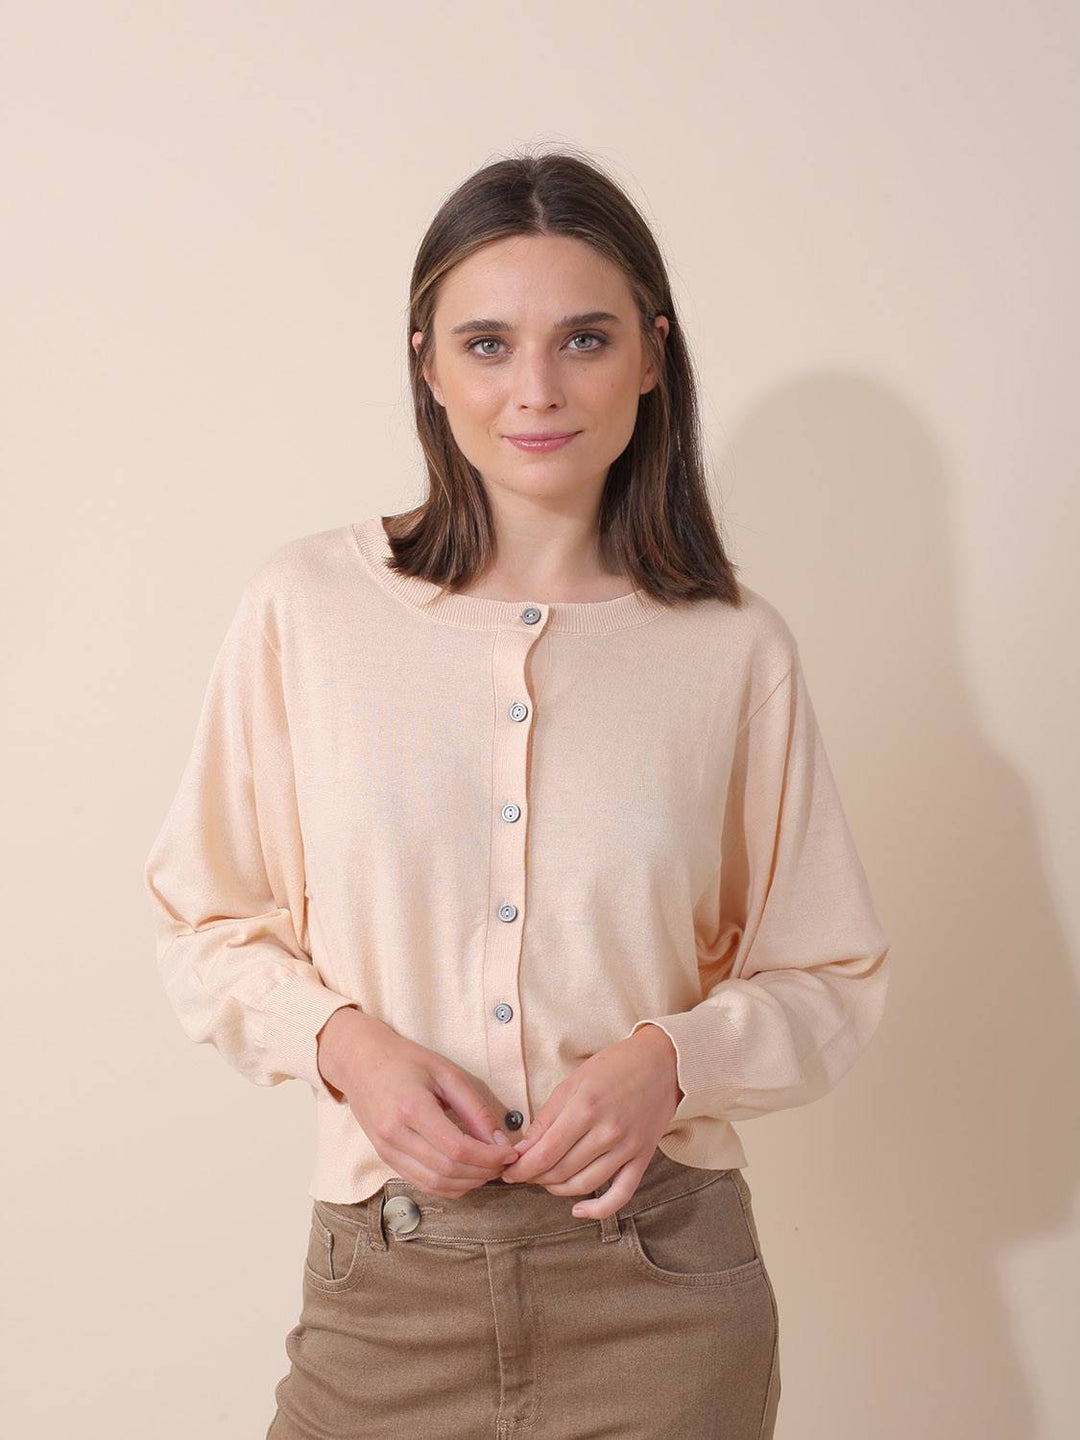 Basic Cotton Cardigan - Pink Nude | Indi & Cold - Clearance